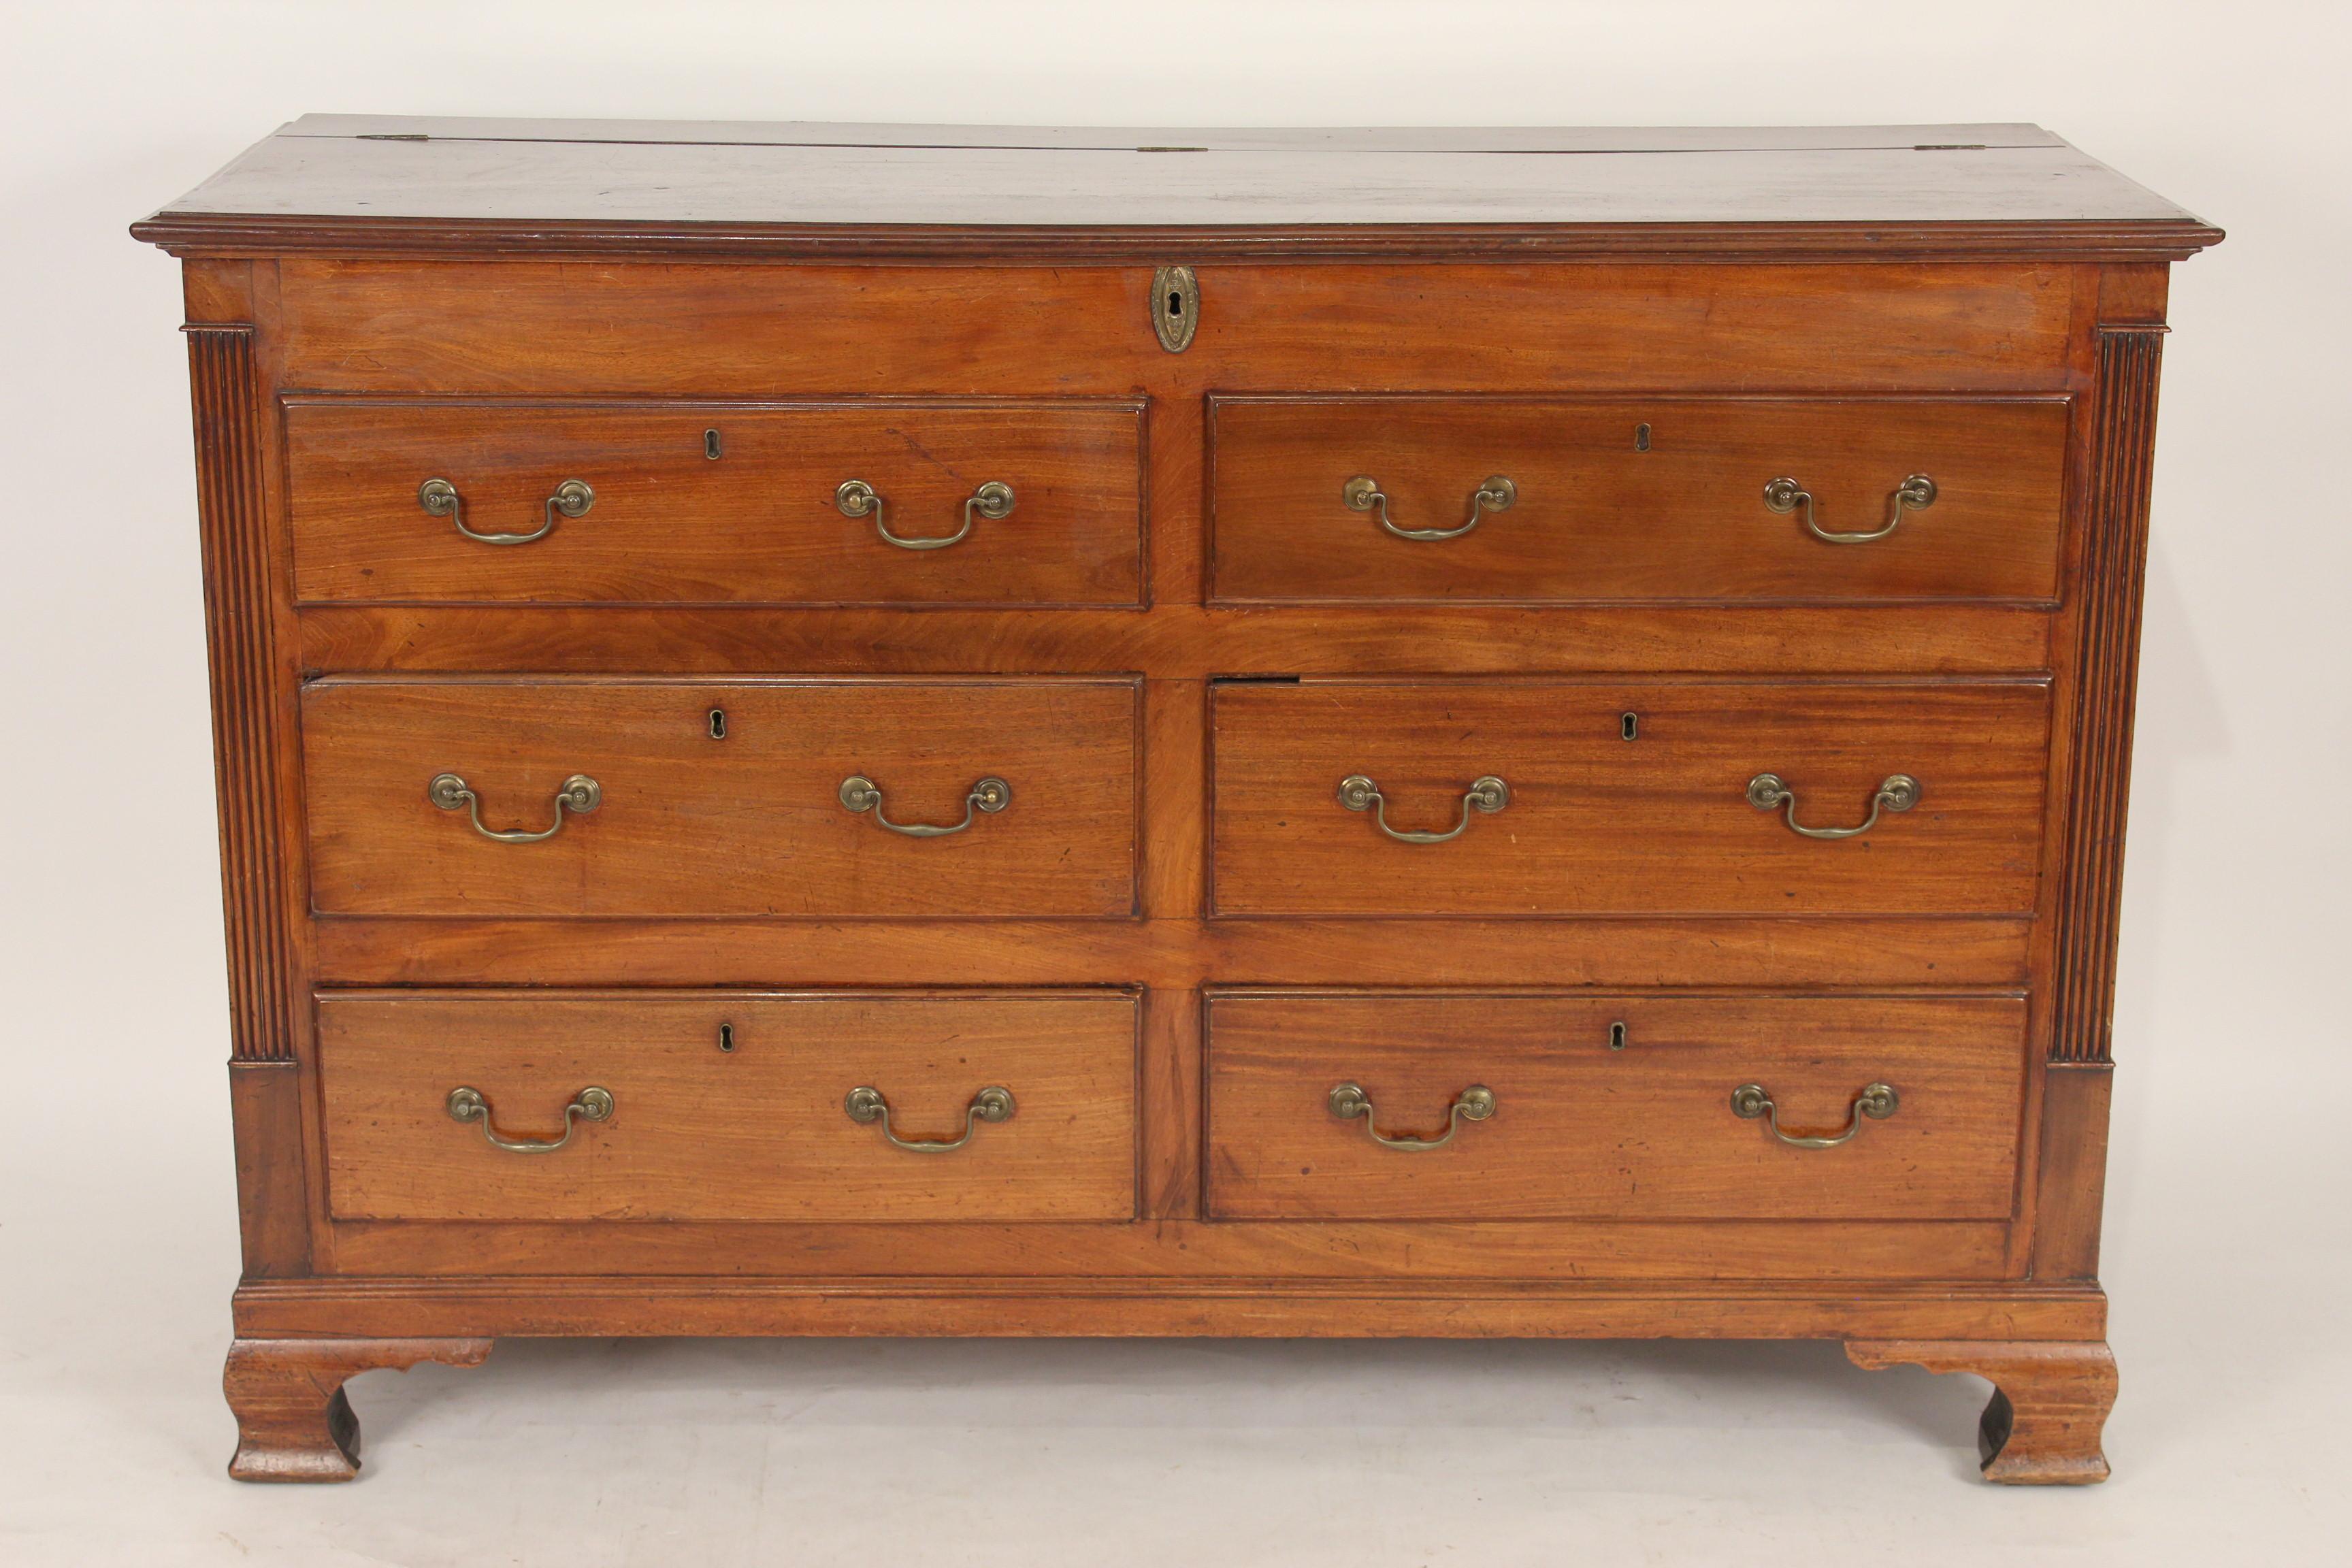 Antique George III style mahogany mule chest, 19th century. With columns flanking drawers, ogee bracket feet and nice patina to the mahogany. The top is hinged and lifts up, there are 6 functioning drawers for storage. Normally only the bottom 4